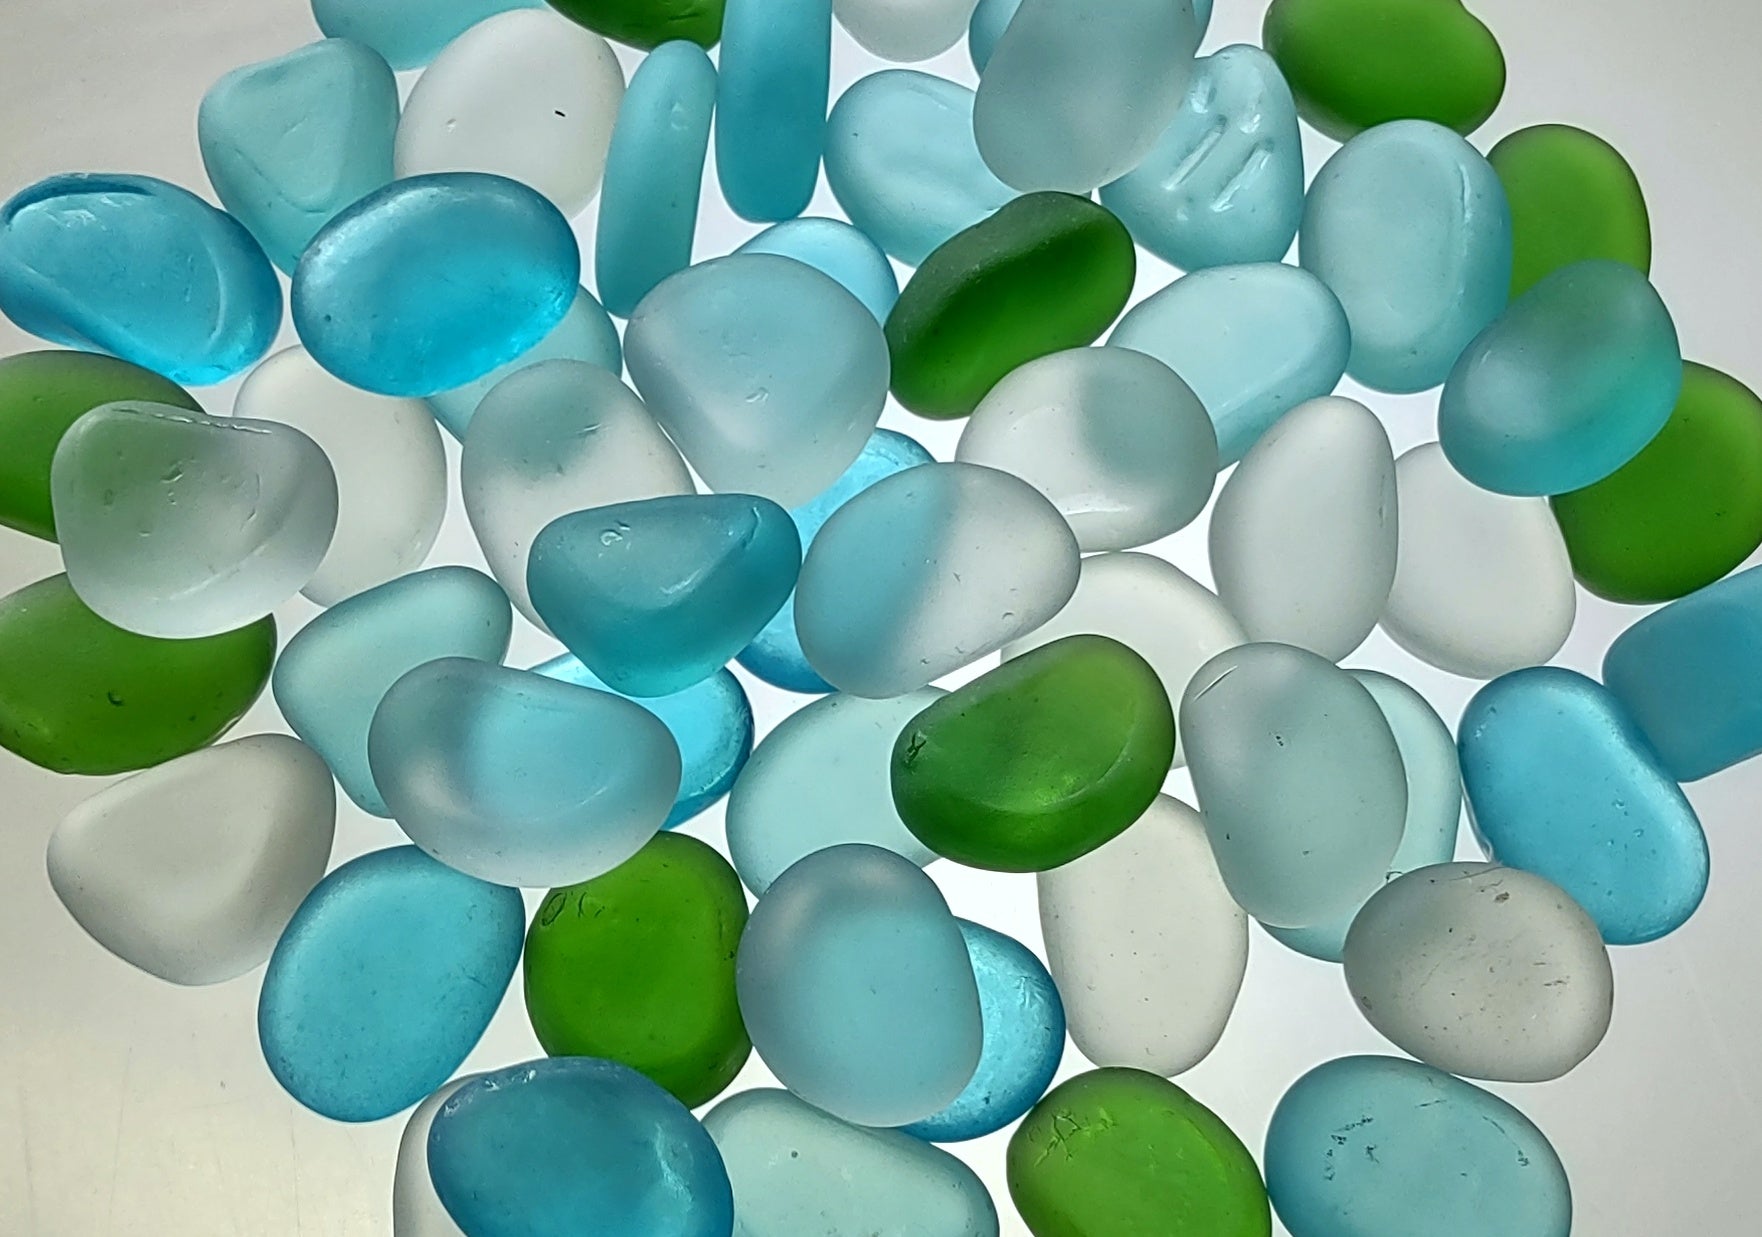 Beach Sea Glass Rounded Blue Green White Assorted Pebbles (approx. 1  Kilogram or 2.2 lbs. 1-1.5 inches) Man Made Tumbled Frosted Glass!